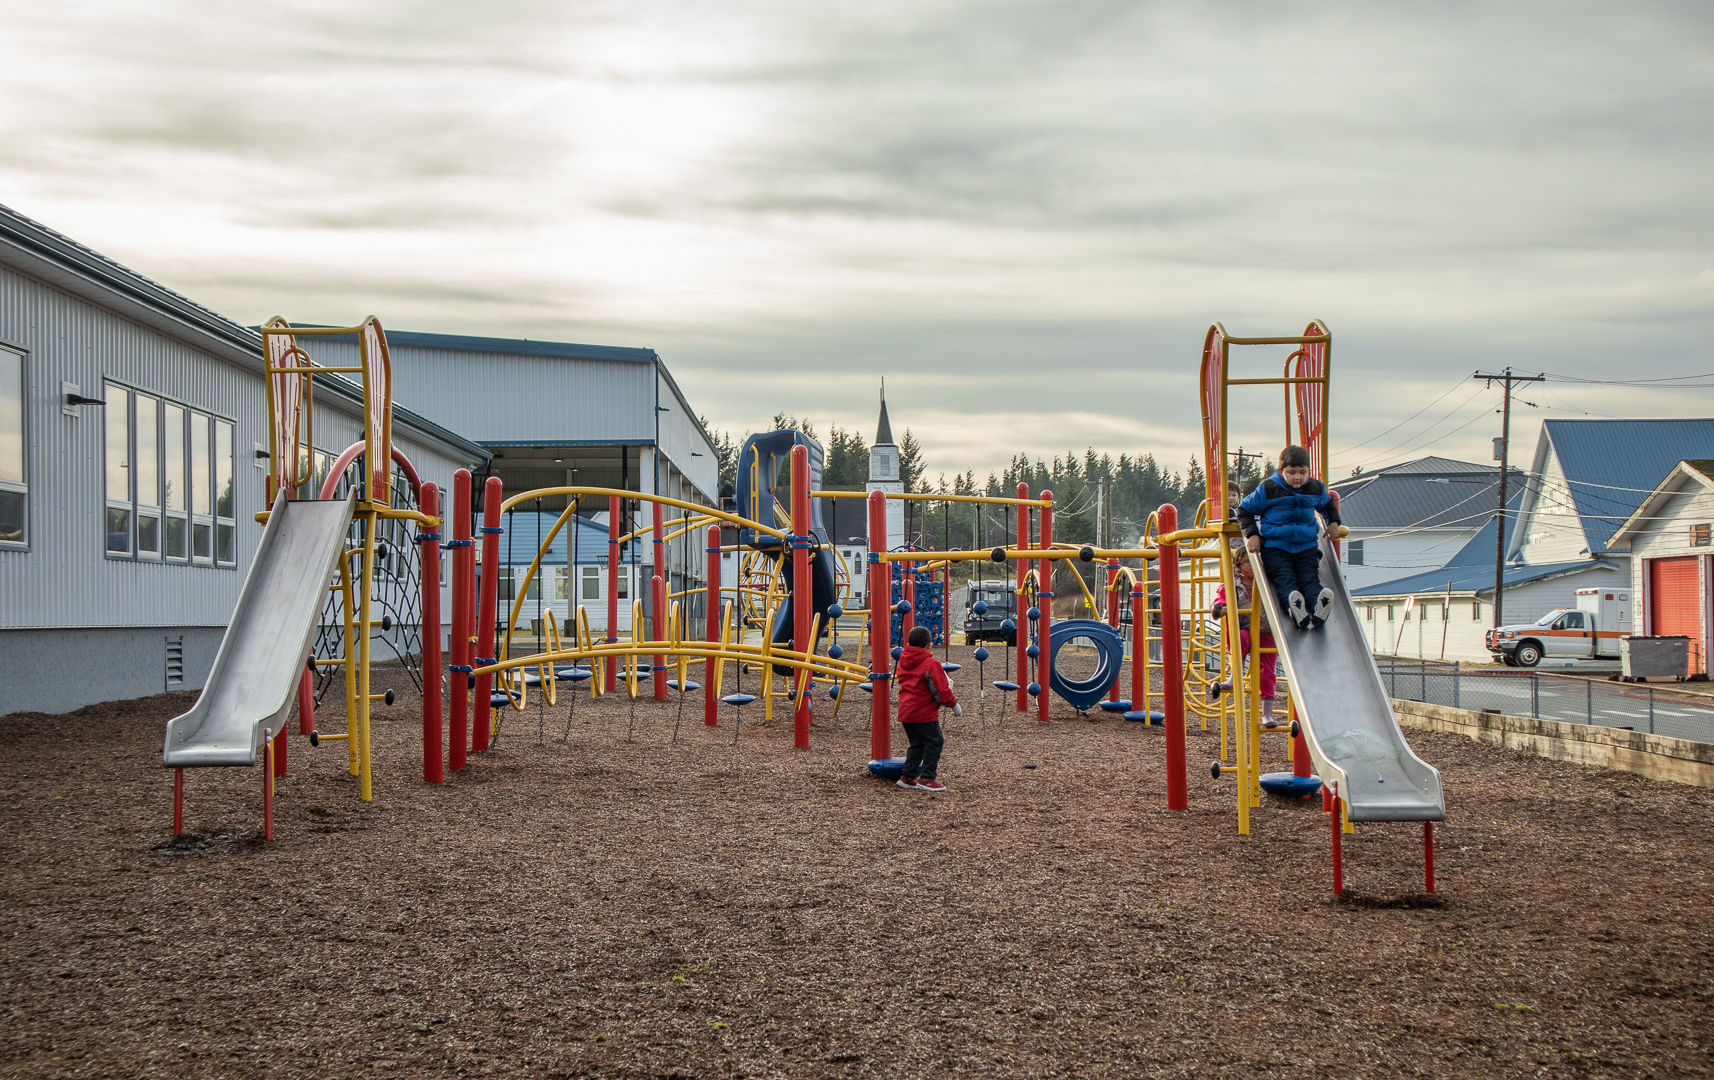 students playing on the playground at RJ Elementary